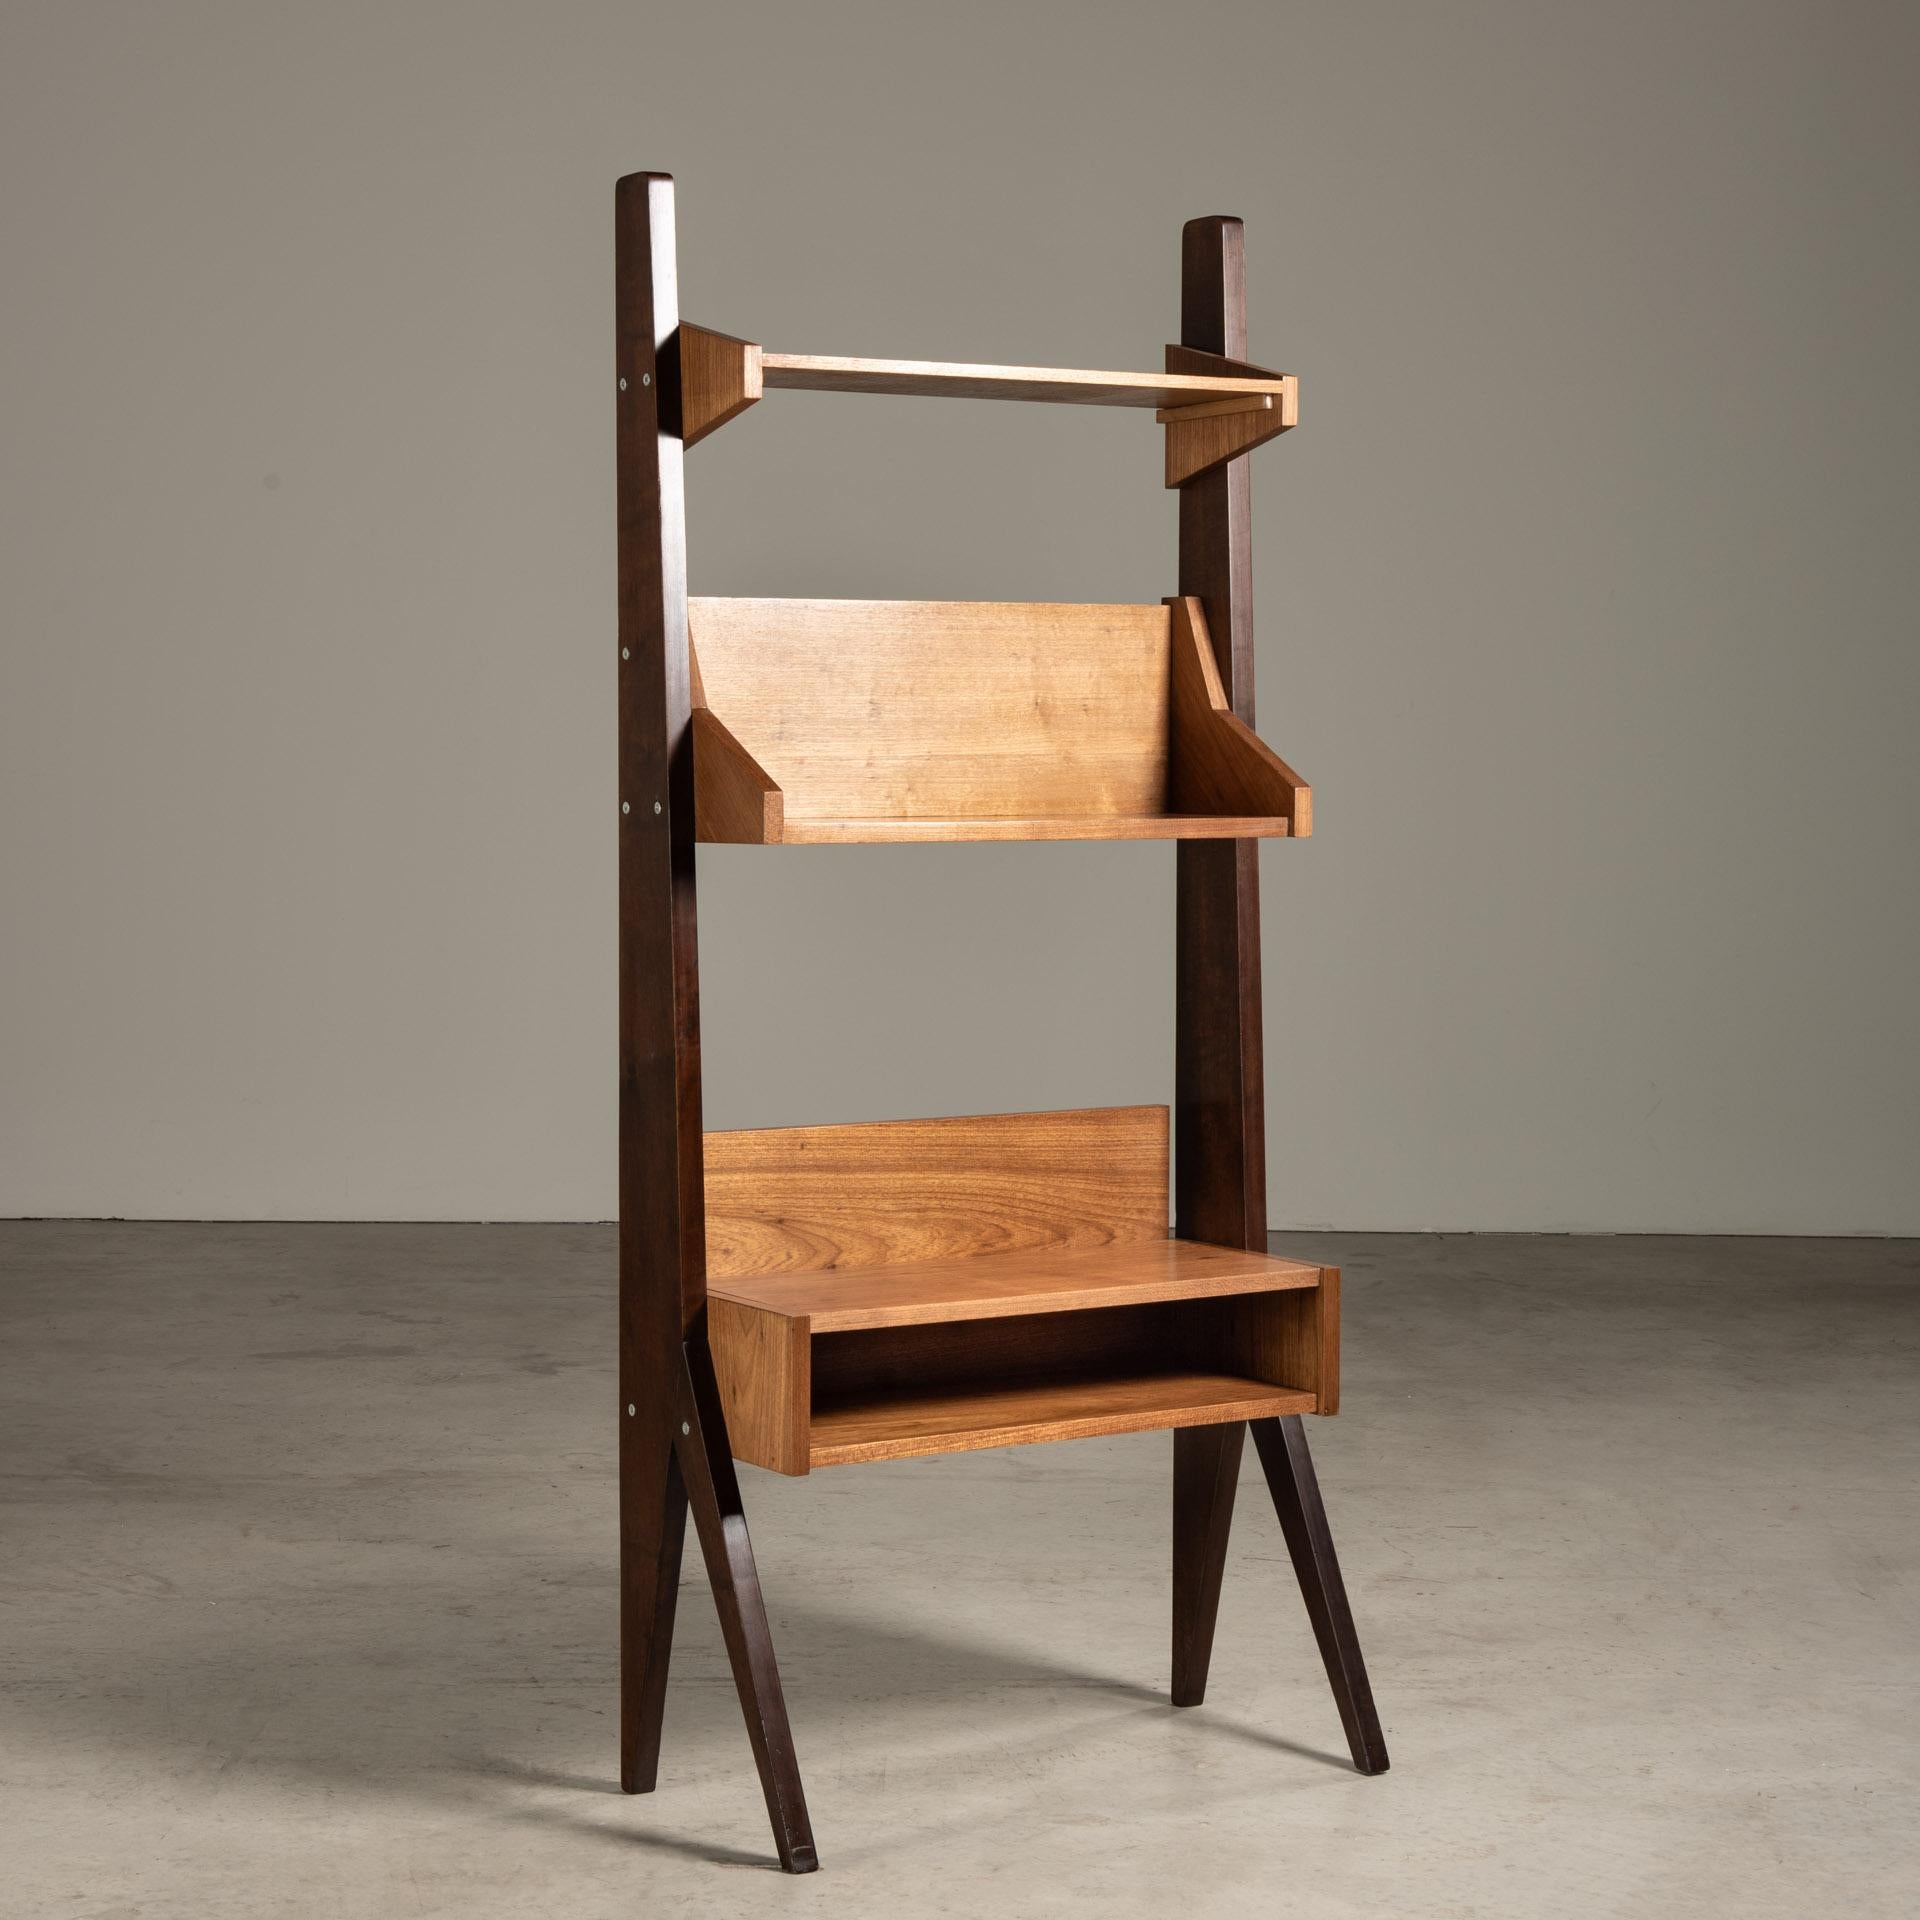 This wooden shelf is a fine example of Brazilian design from the mid-20th century, by Zanine Caldas, who was known for his use of organic materials and innovative approaches to woodworking.

The shelf is characterized by a simple yet sophisticated